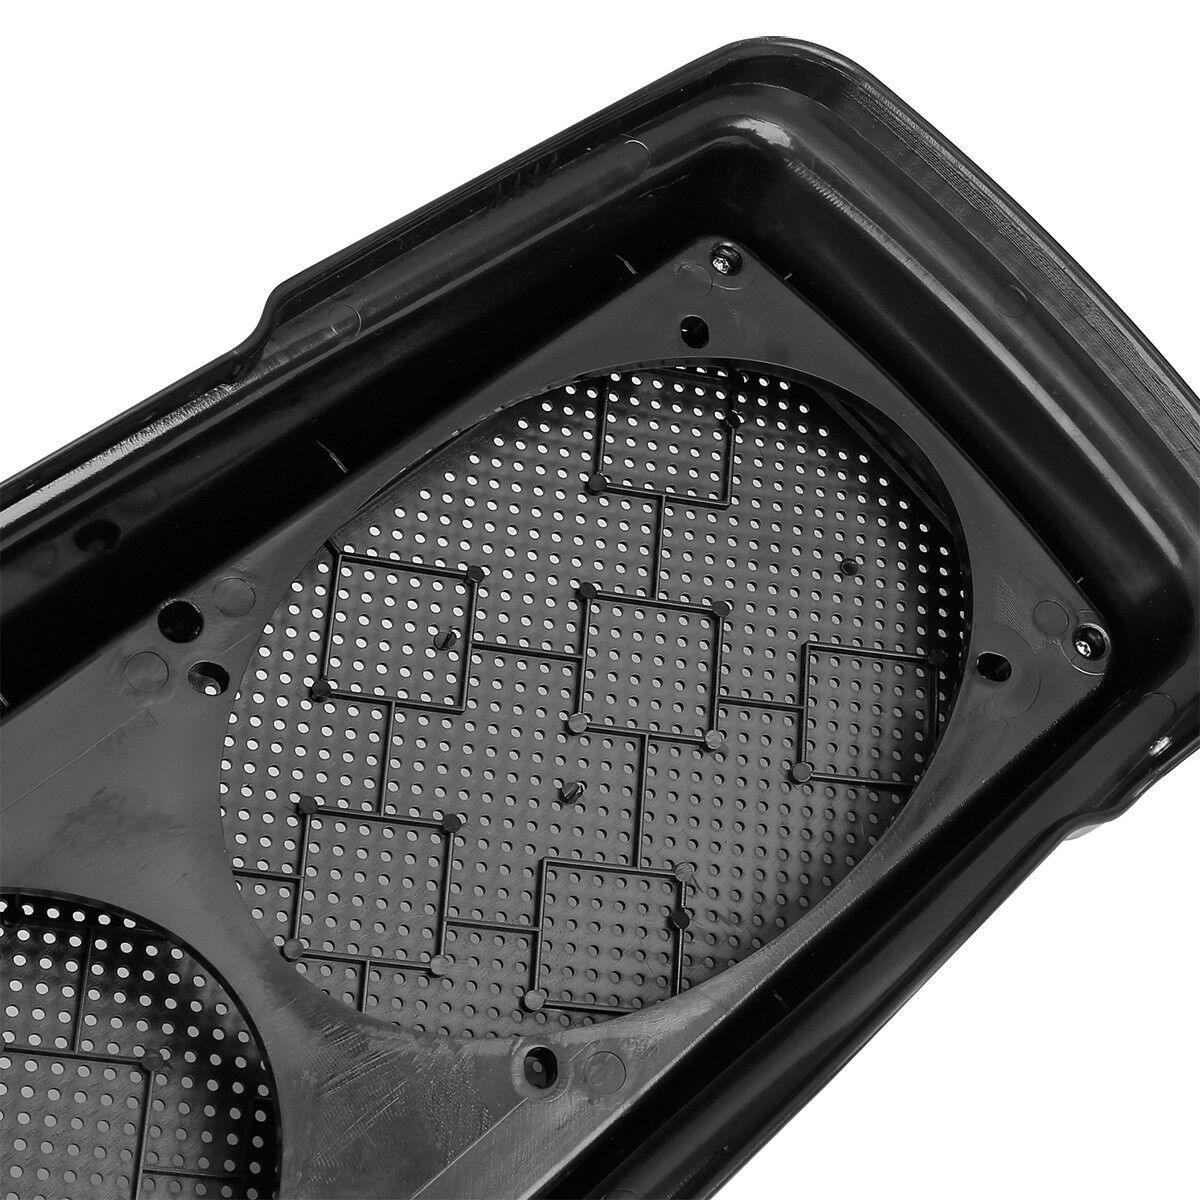 Dual 6x9" Saddlebag Speaker Lids w/Grill Fit For Harley Road Street Glide 93-13 - Moto Life Products